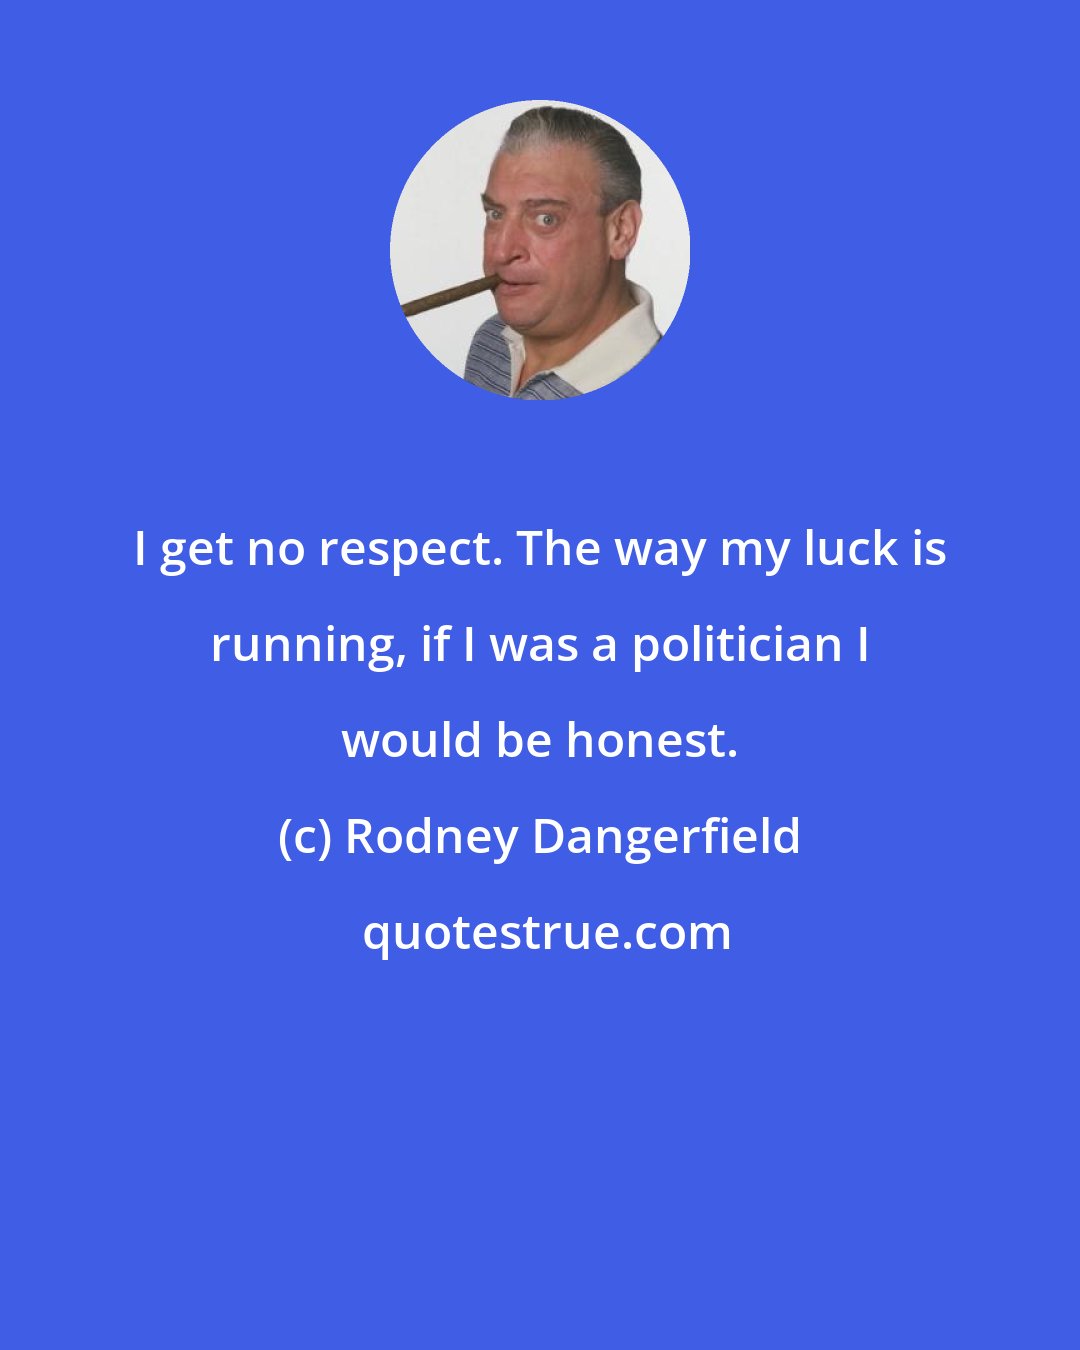 Rodney Dangerfield: I get no respect. The way my luck is running, if I was a politician I would be honest.